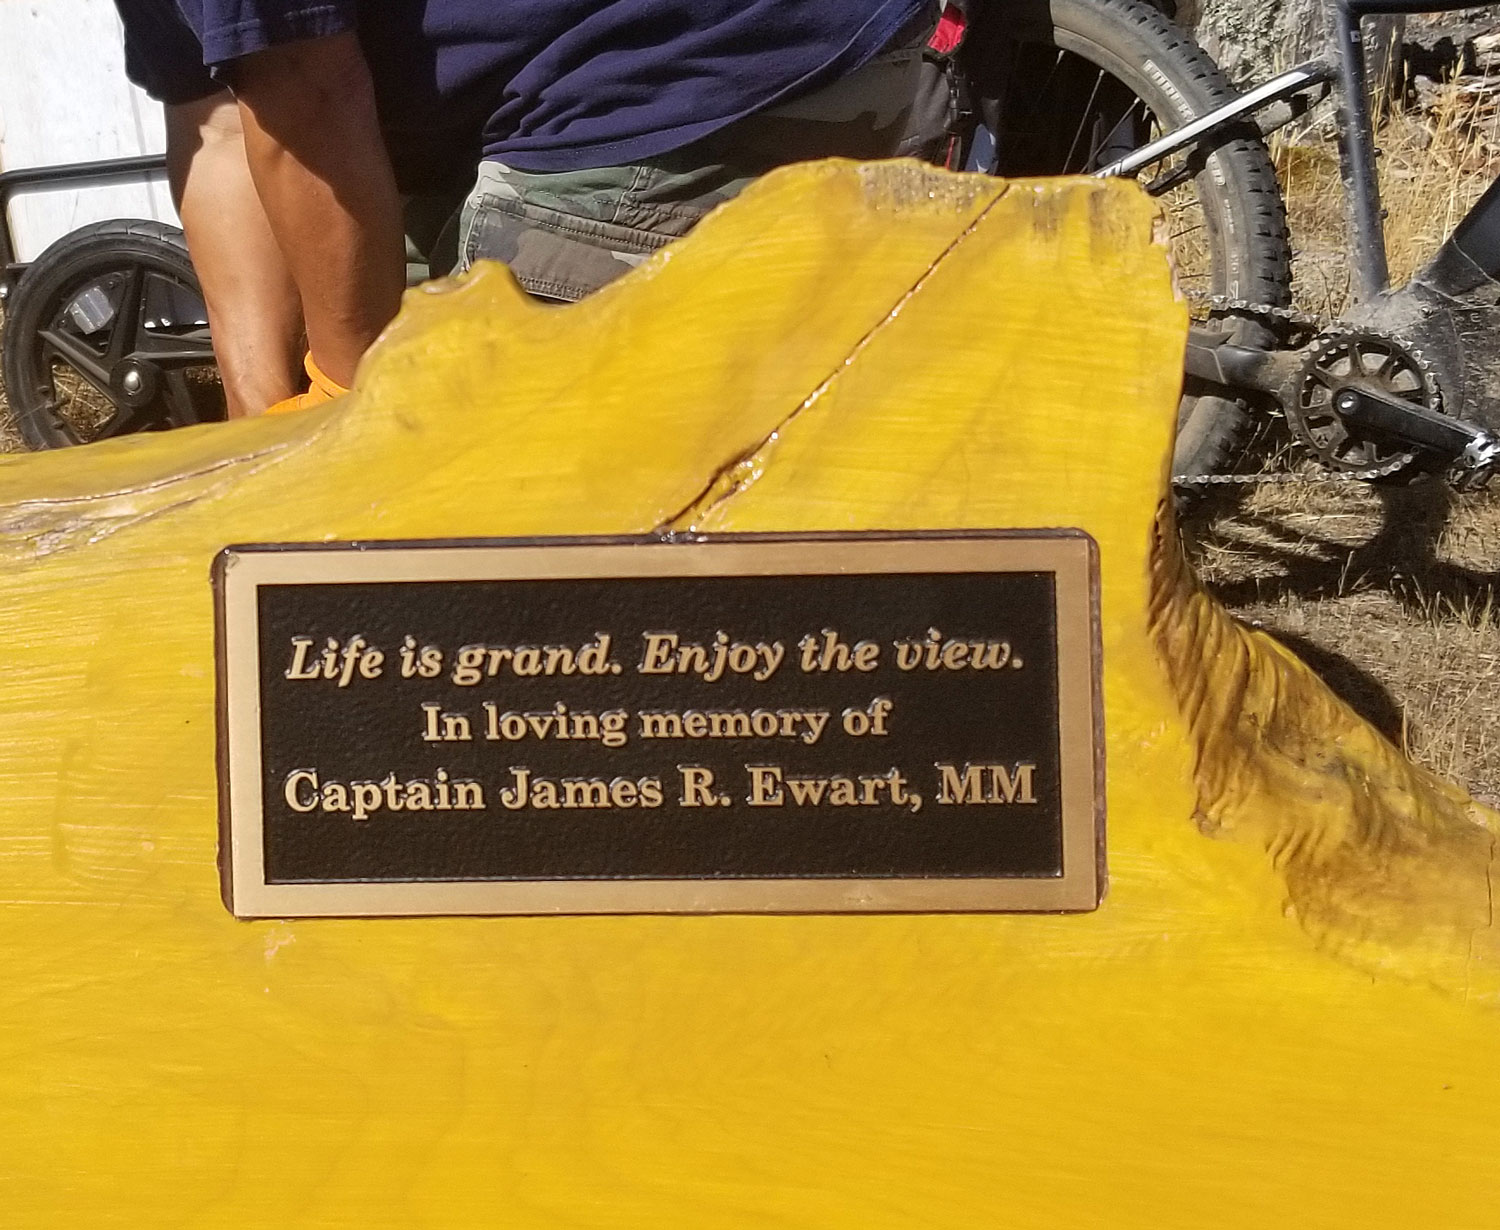 Bench plaque: "Life is grand. Enjoy the view. In loving memory of Captain James R. Ewart, MM"